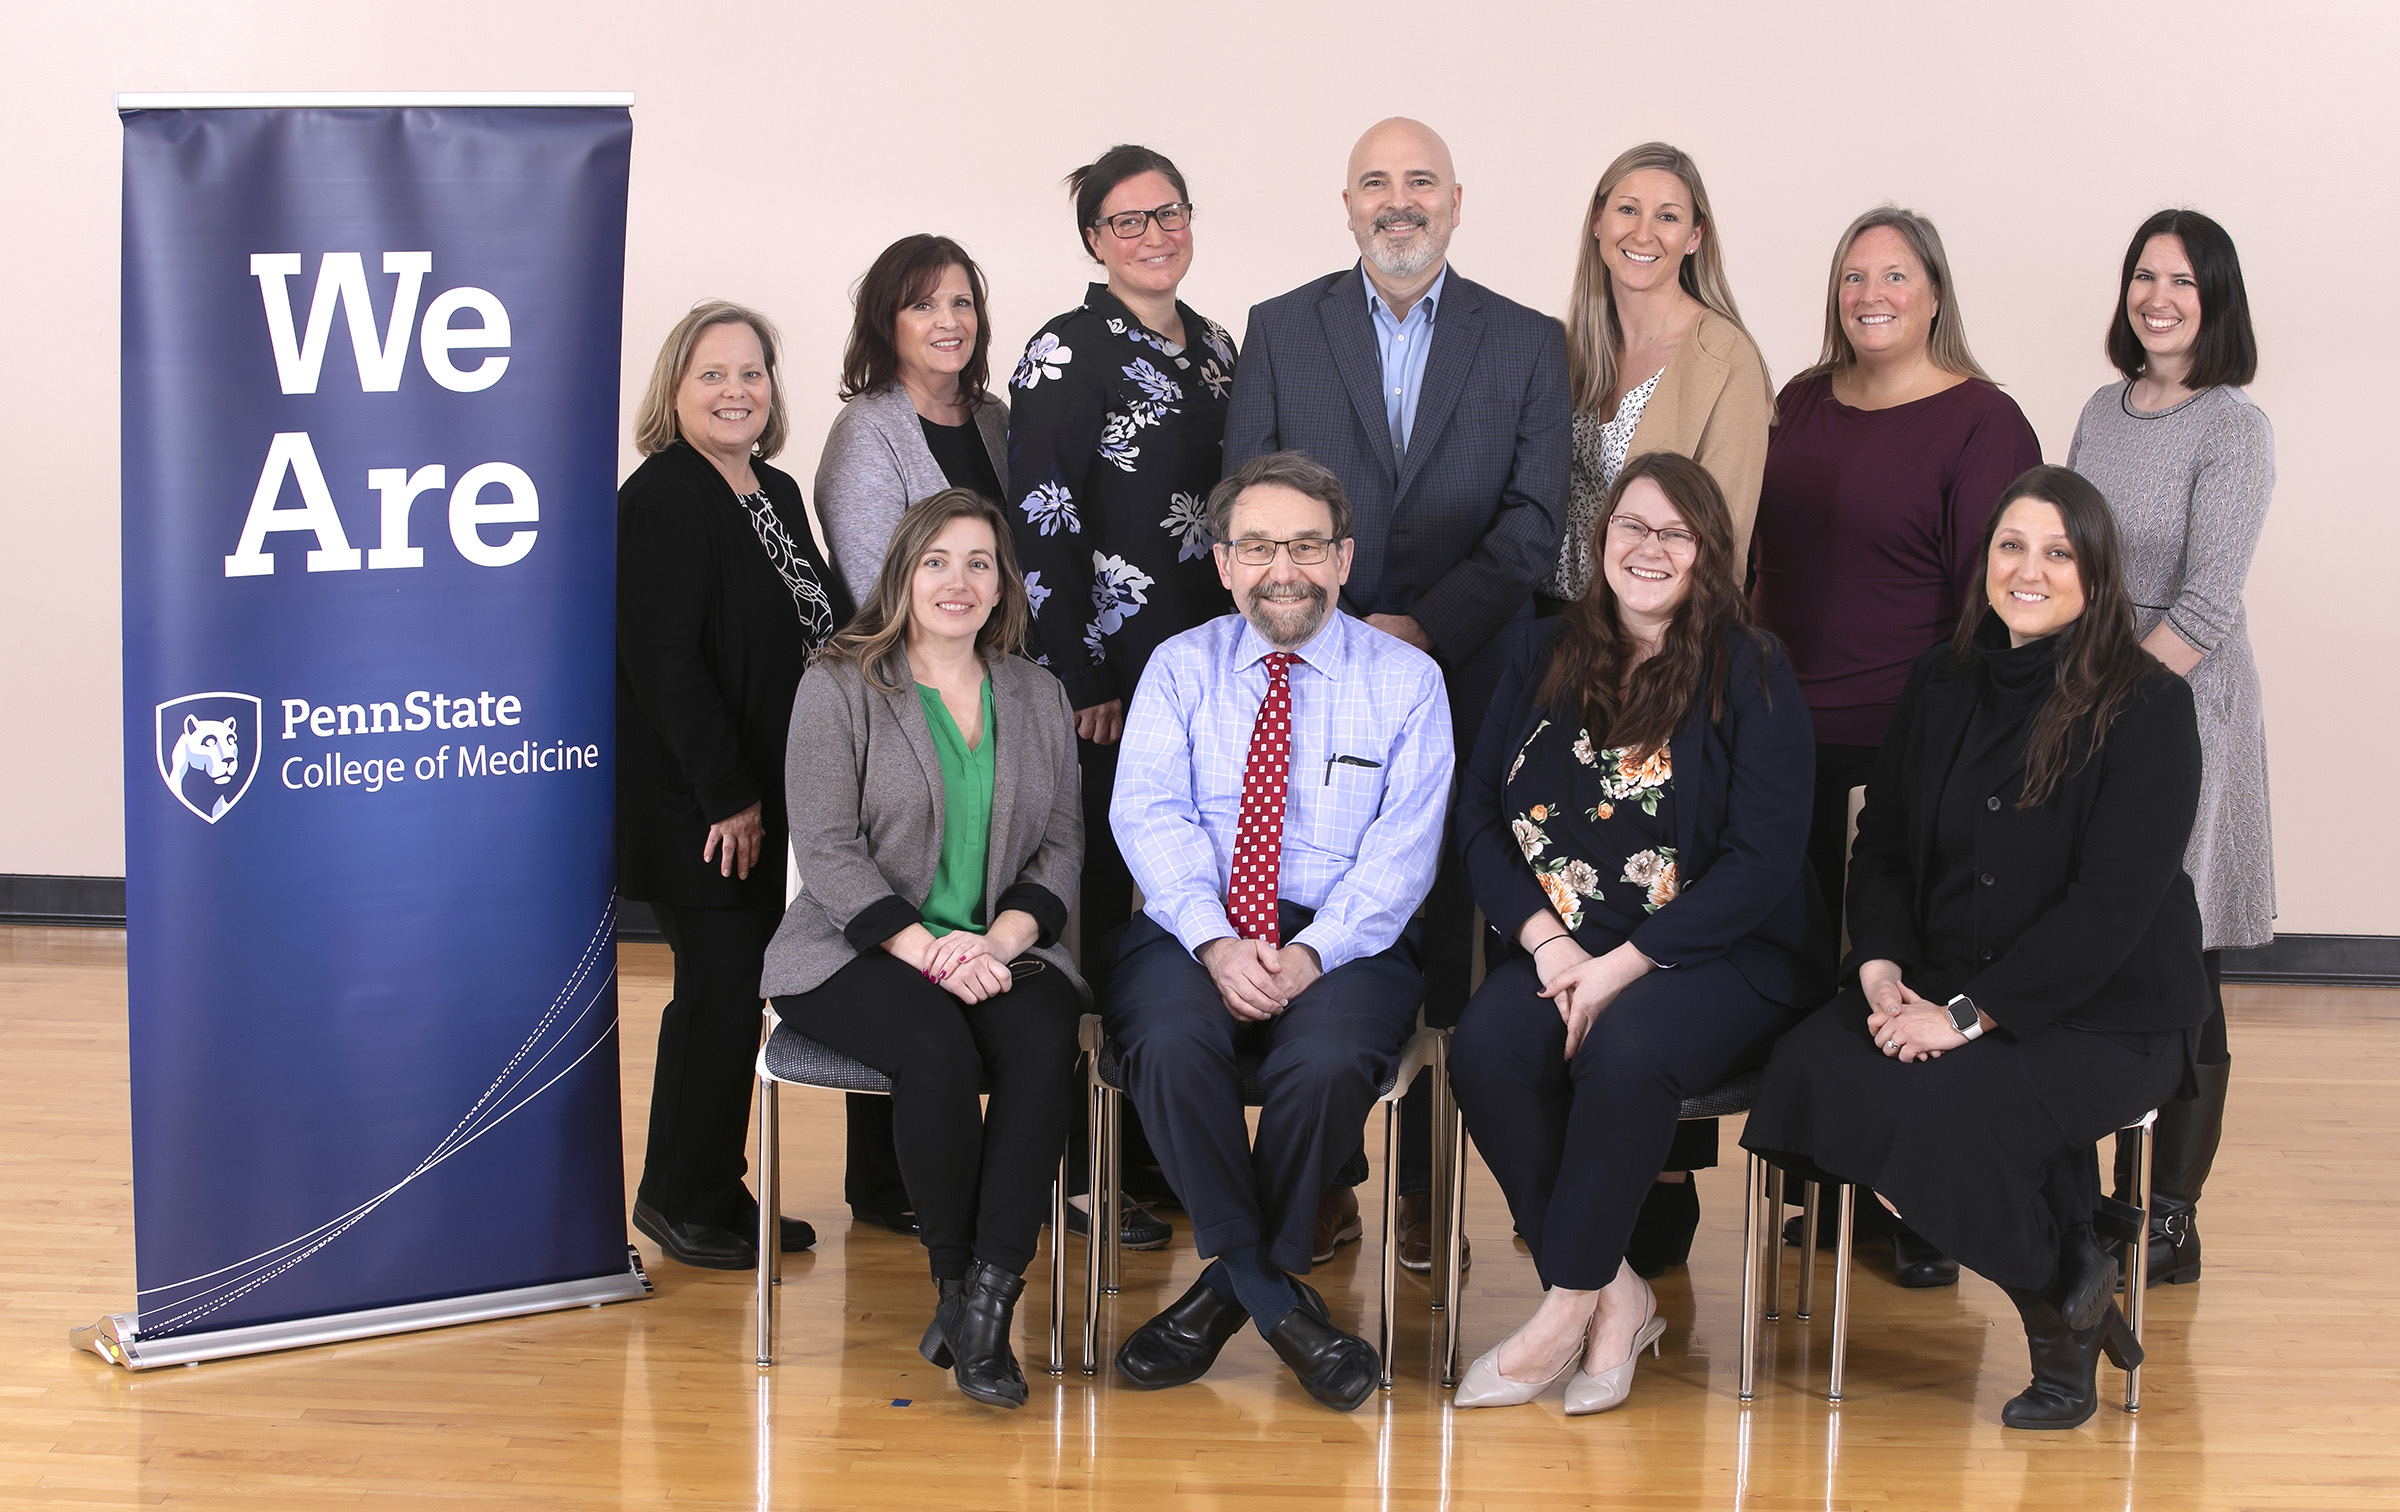 Physician Assistant Program faculty and staff, four seated in front and seven standing behind, are pictured next to a We Are Penn State College of Medicine banner.